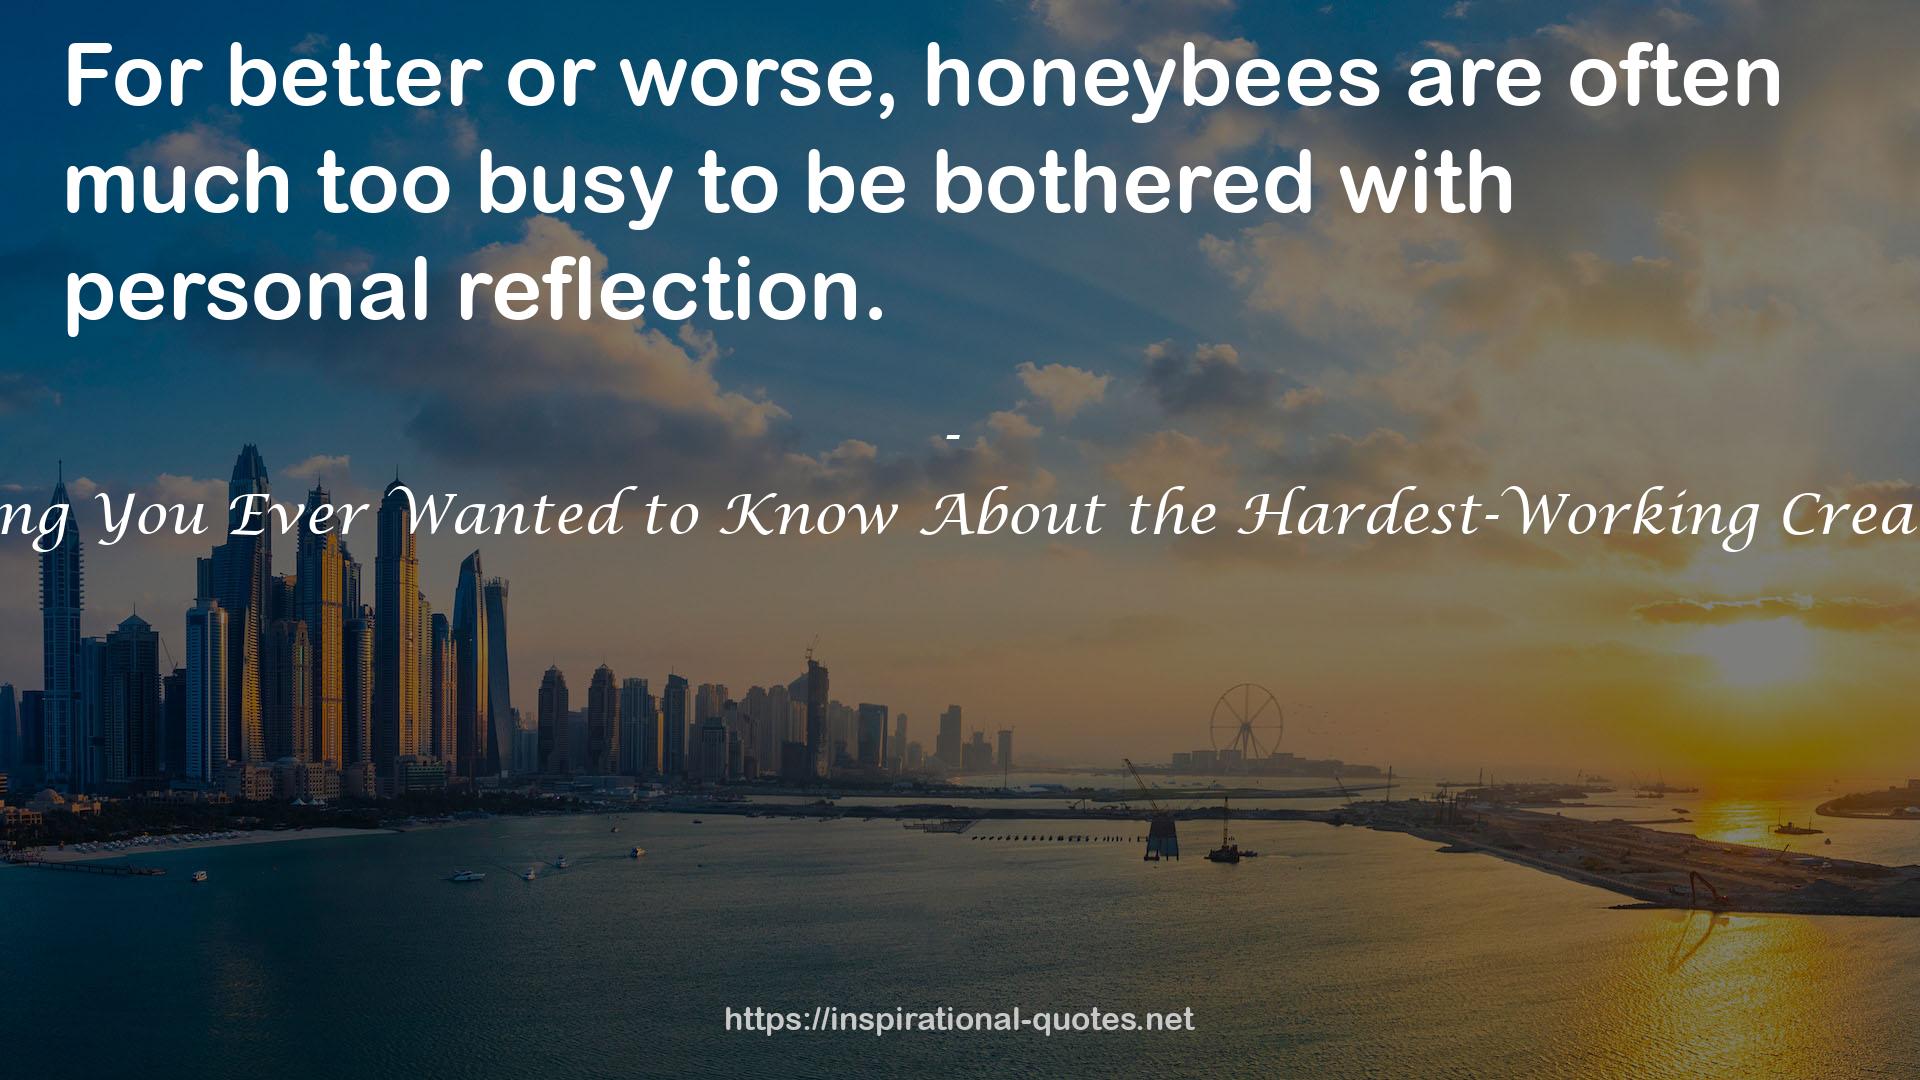 Plan Bee: Everything You Ever Wanted to Know About the Hardest-Working Creatures on the Planet QUOTES